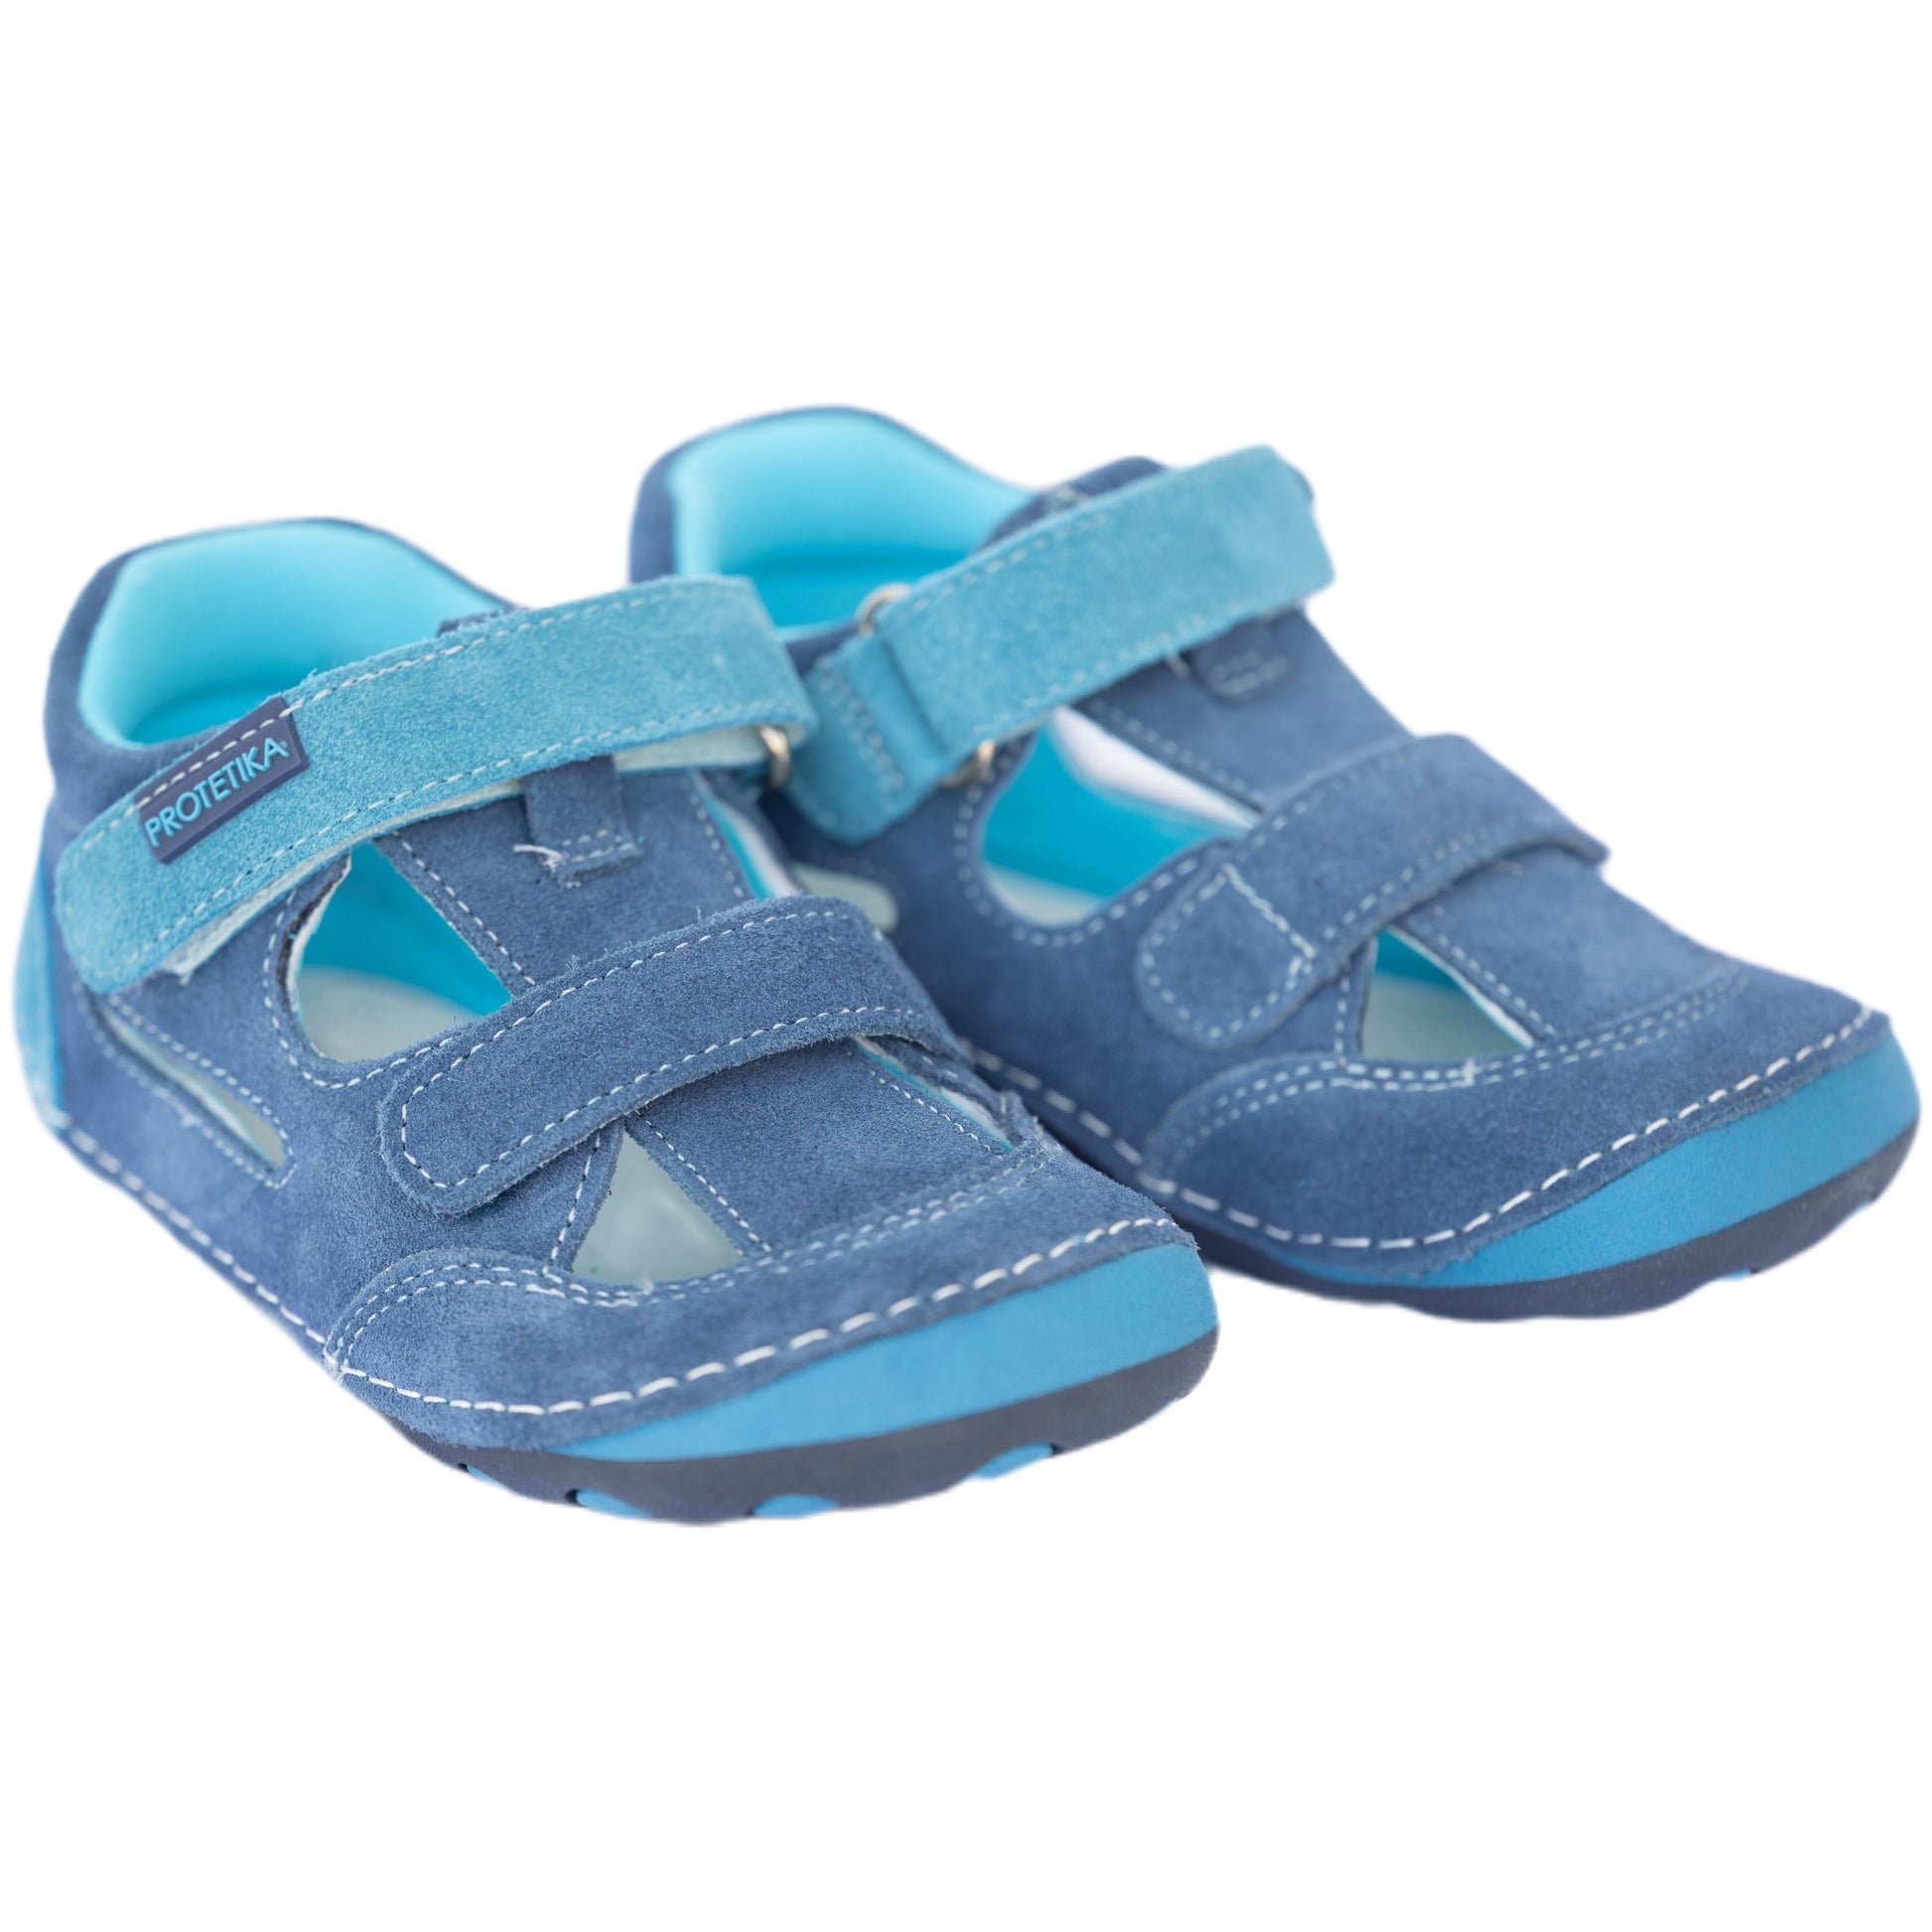 barefoot FLIP blue toddler boy sneakers (wide) - feelgoodshoes.ae